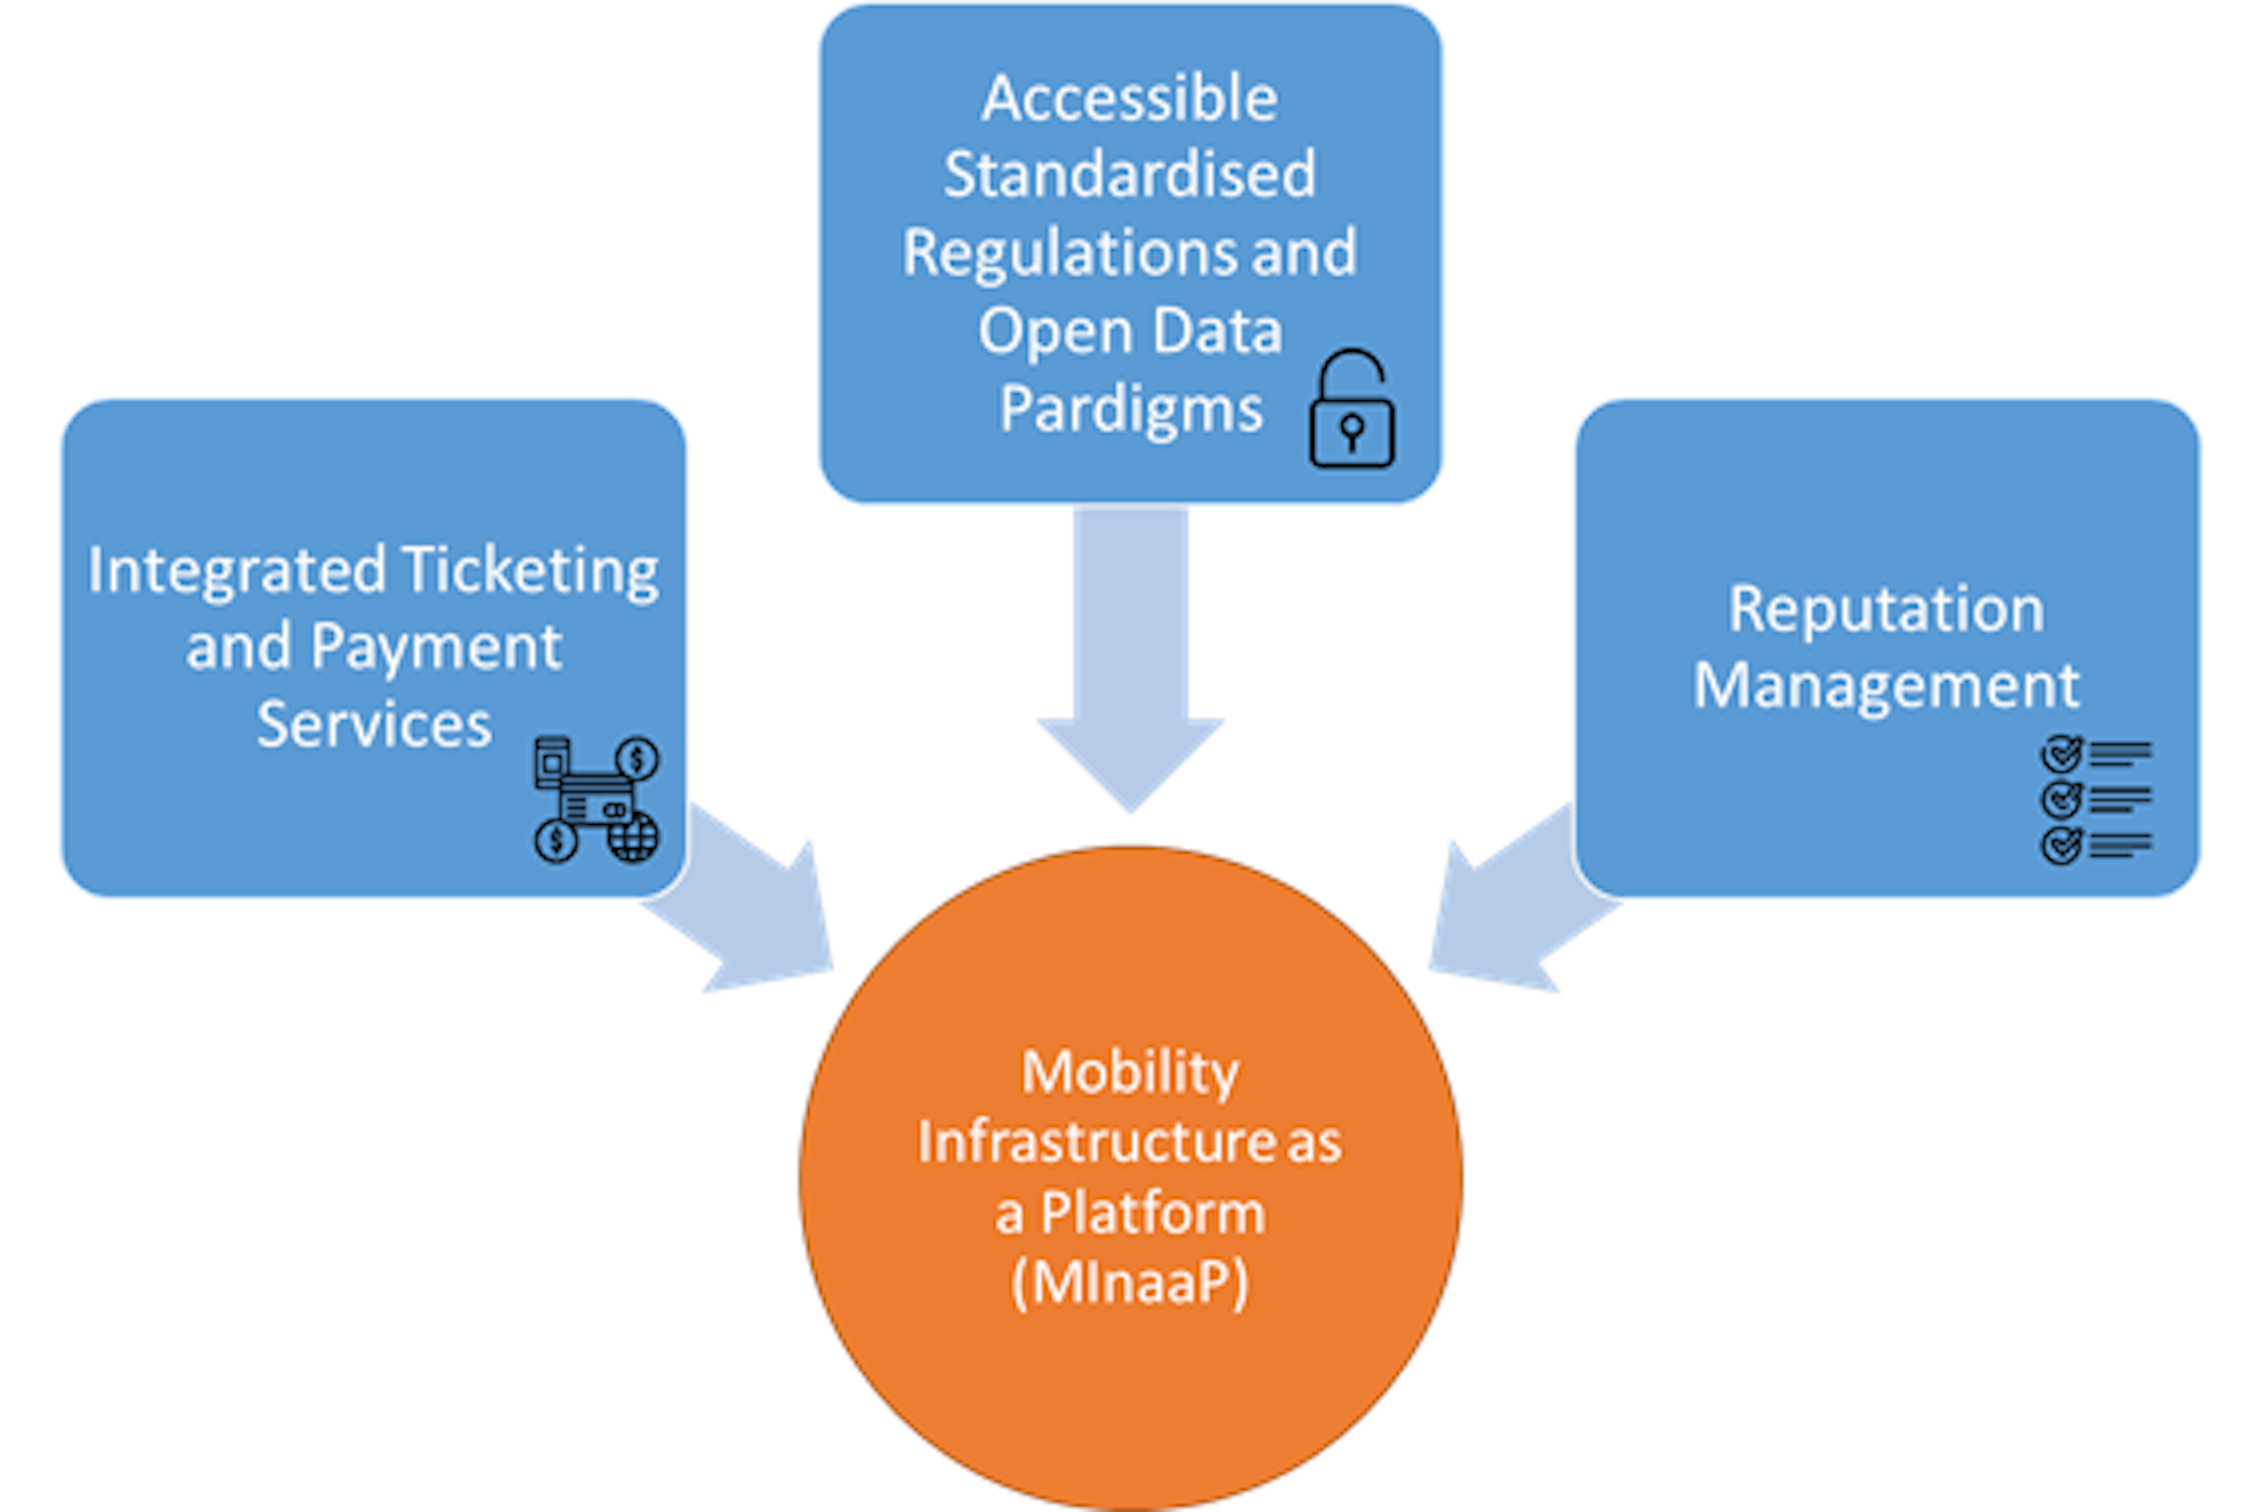 All your transport options in one place: why mobility as a service needs a proper platform